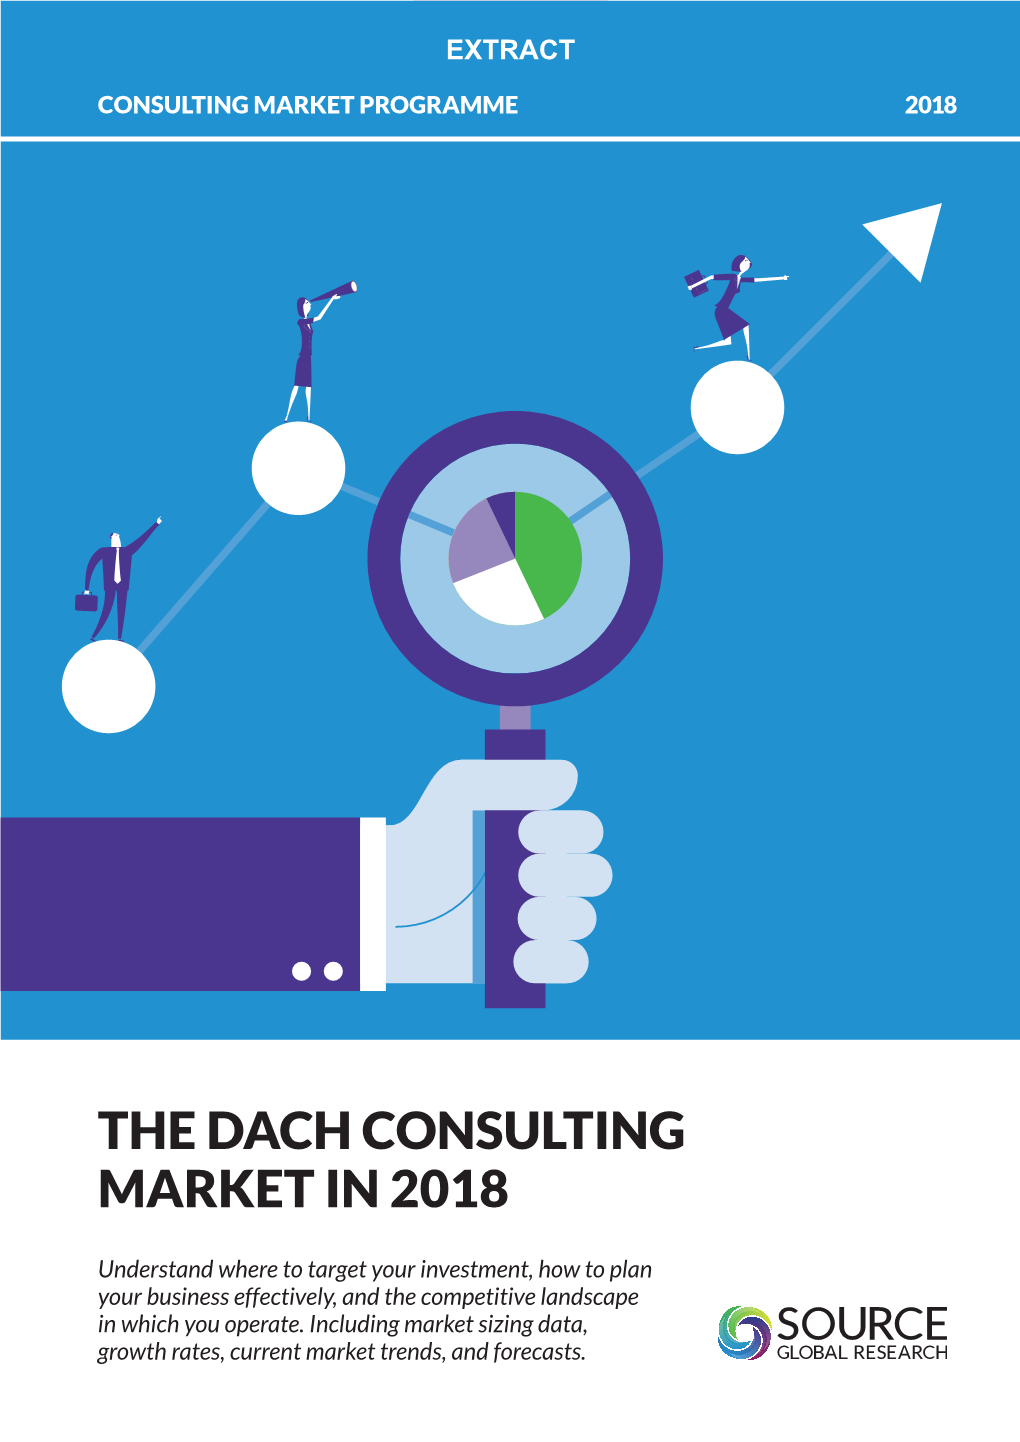 The Dach Consulting Market in 2018